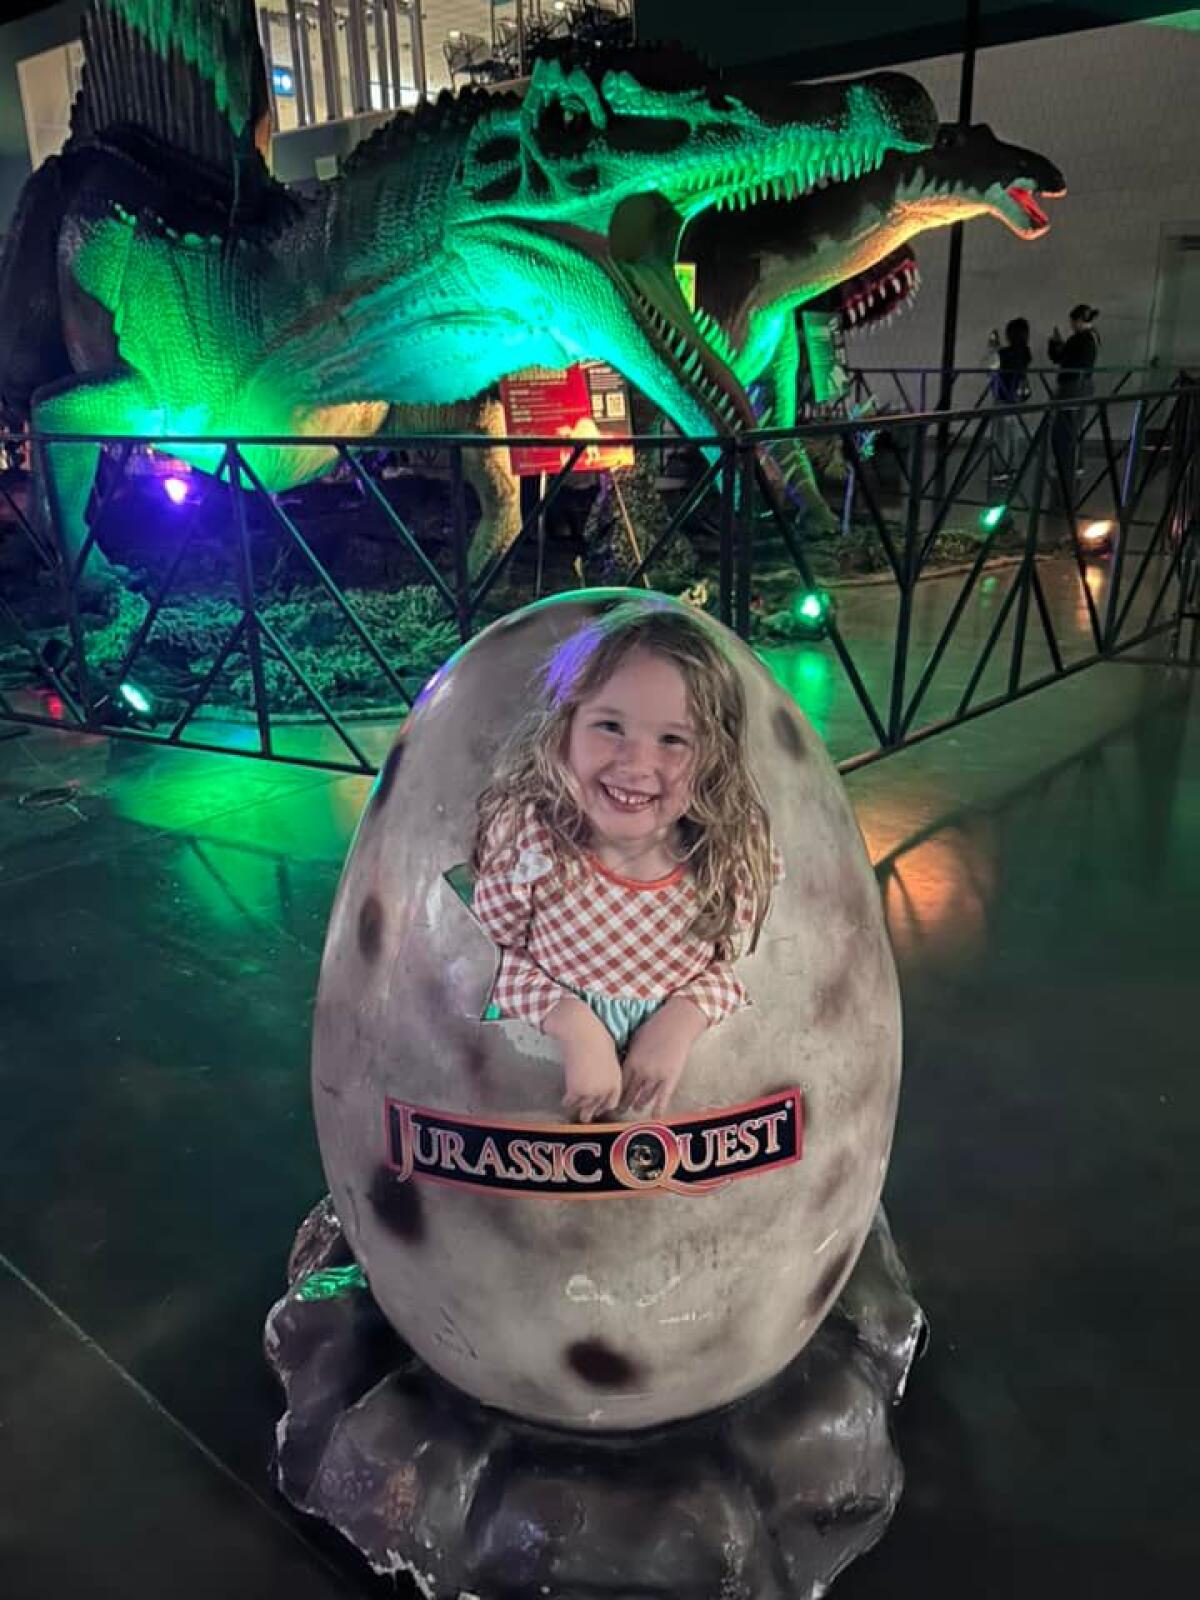 A young girl poses for a picture as though hatched from a dinosaur egg at a Jurassic Quest event.